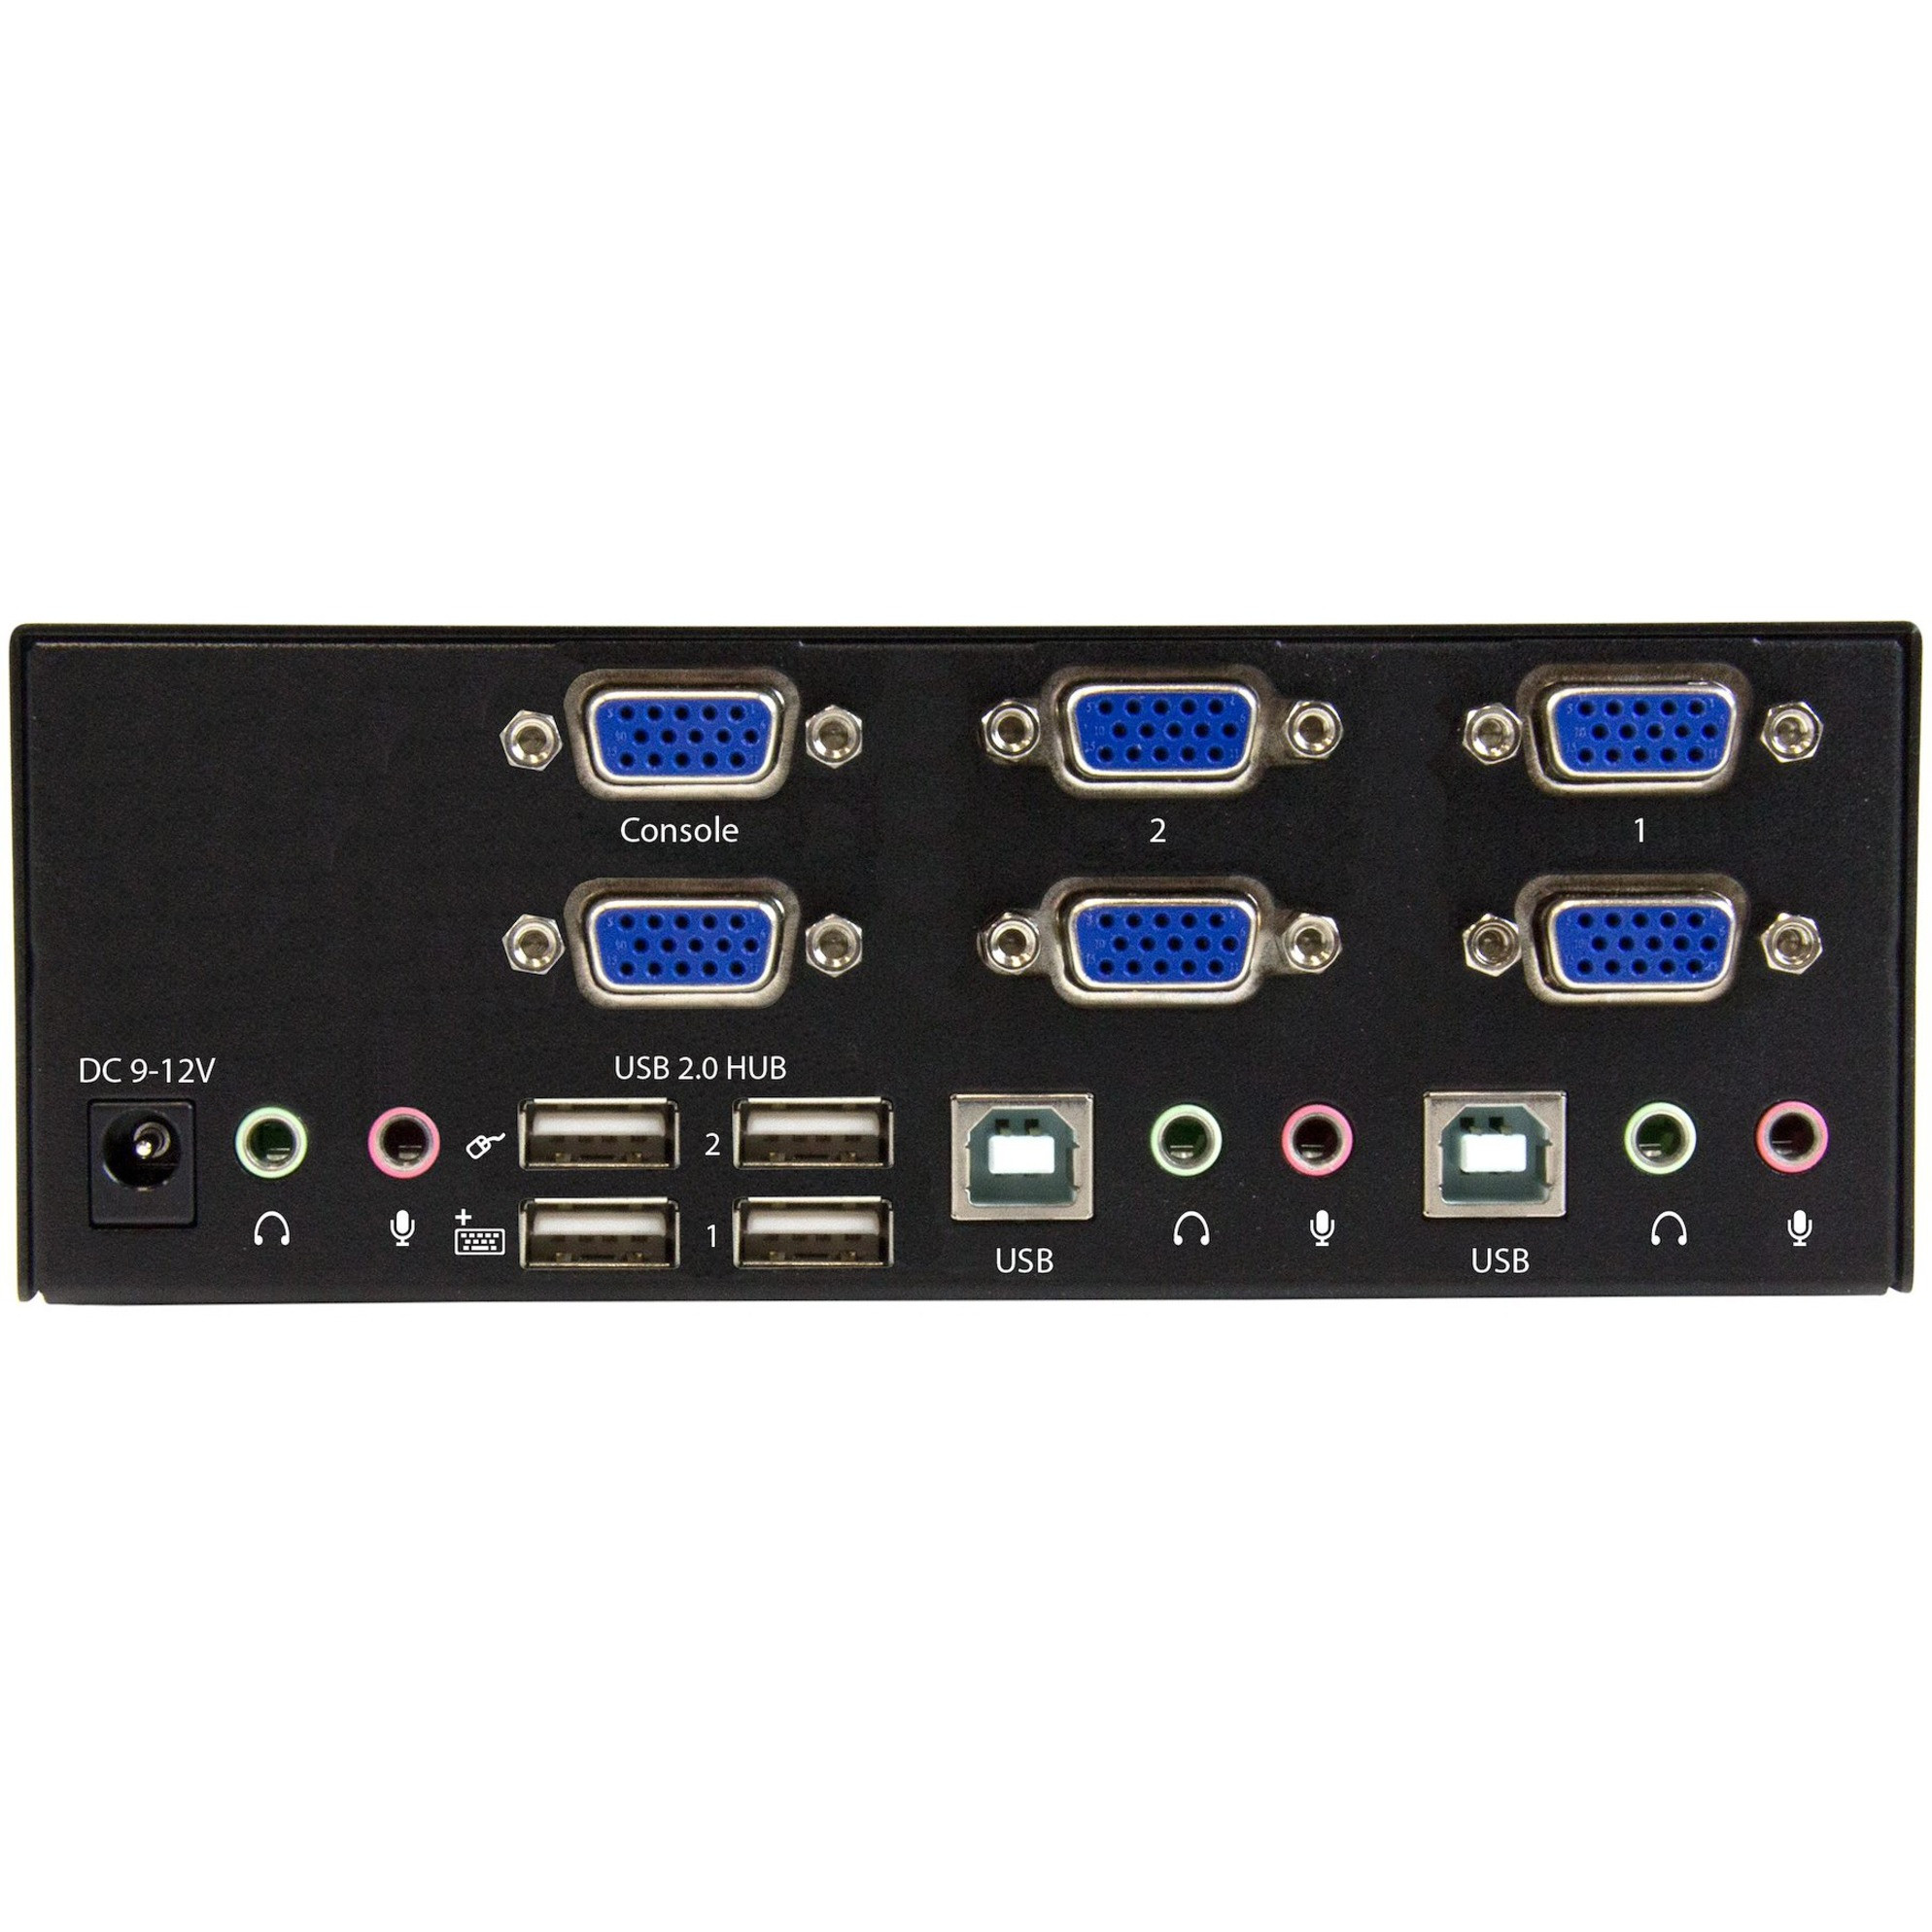 Startech .com 2-port KVM Switch with Dual VGA and 2-port USB HubUSB 2.0Access computers and two shared USB peripherals... SV231DVGAU2A - Corporate Armor